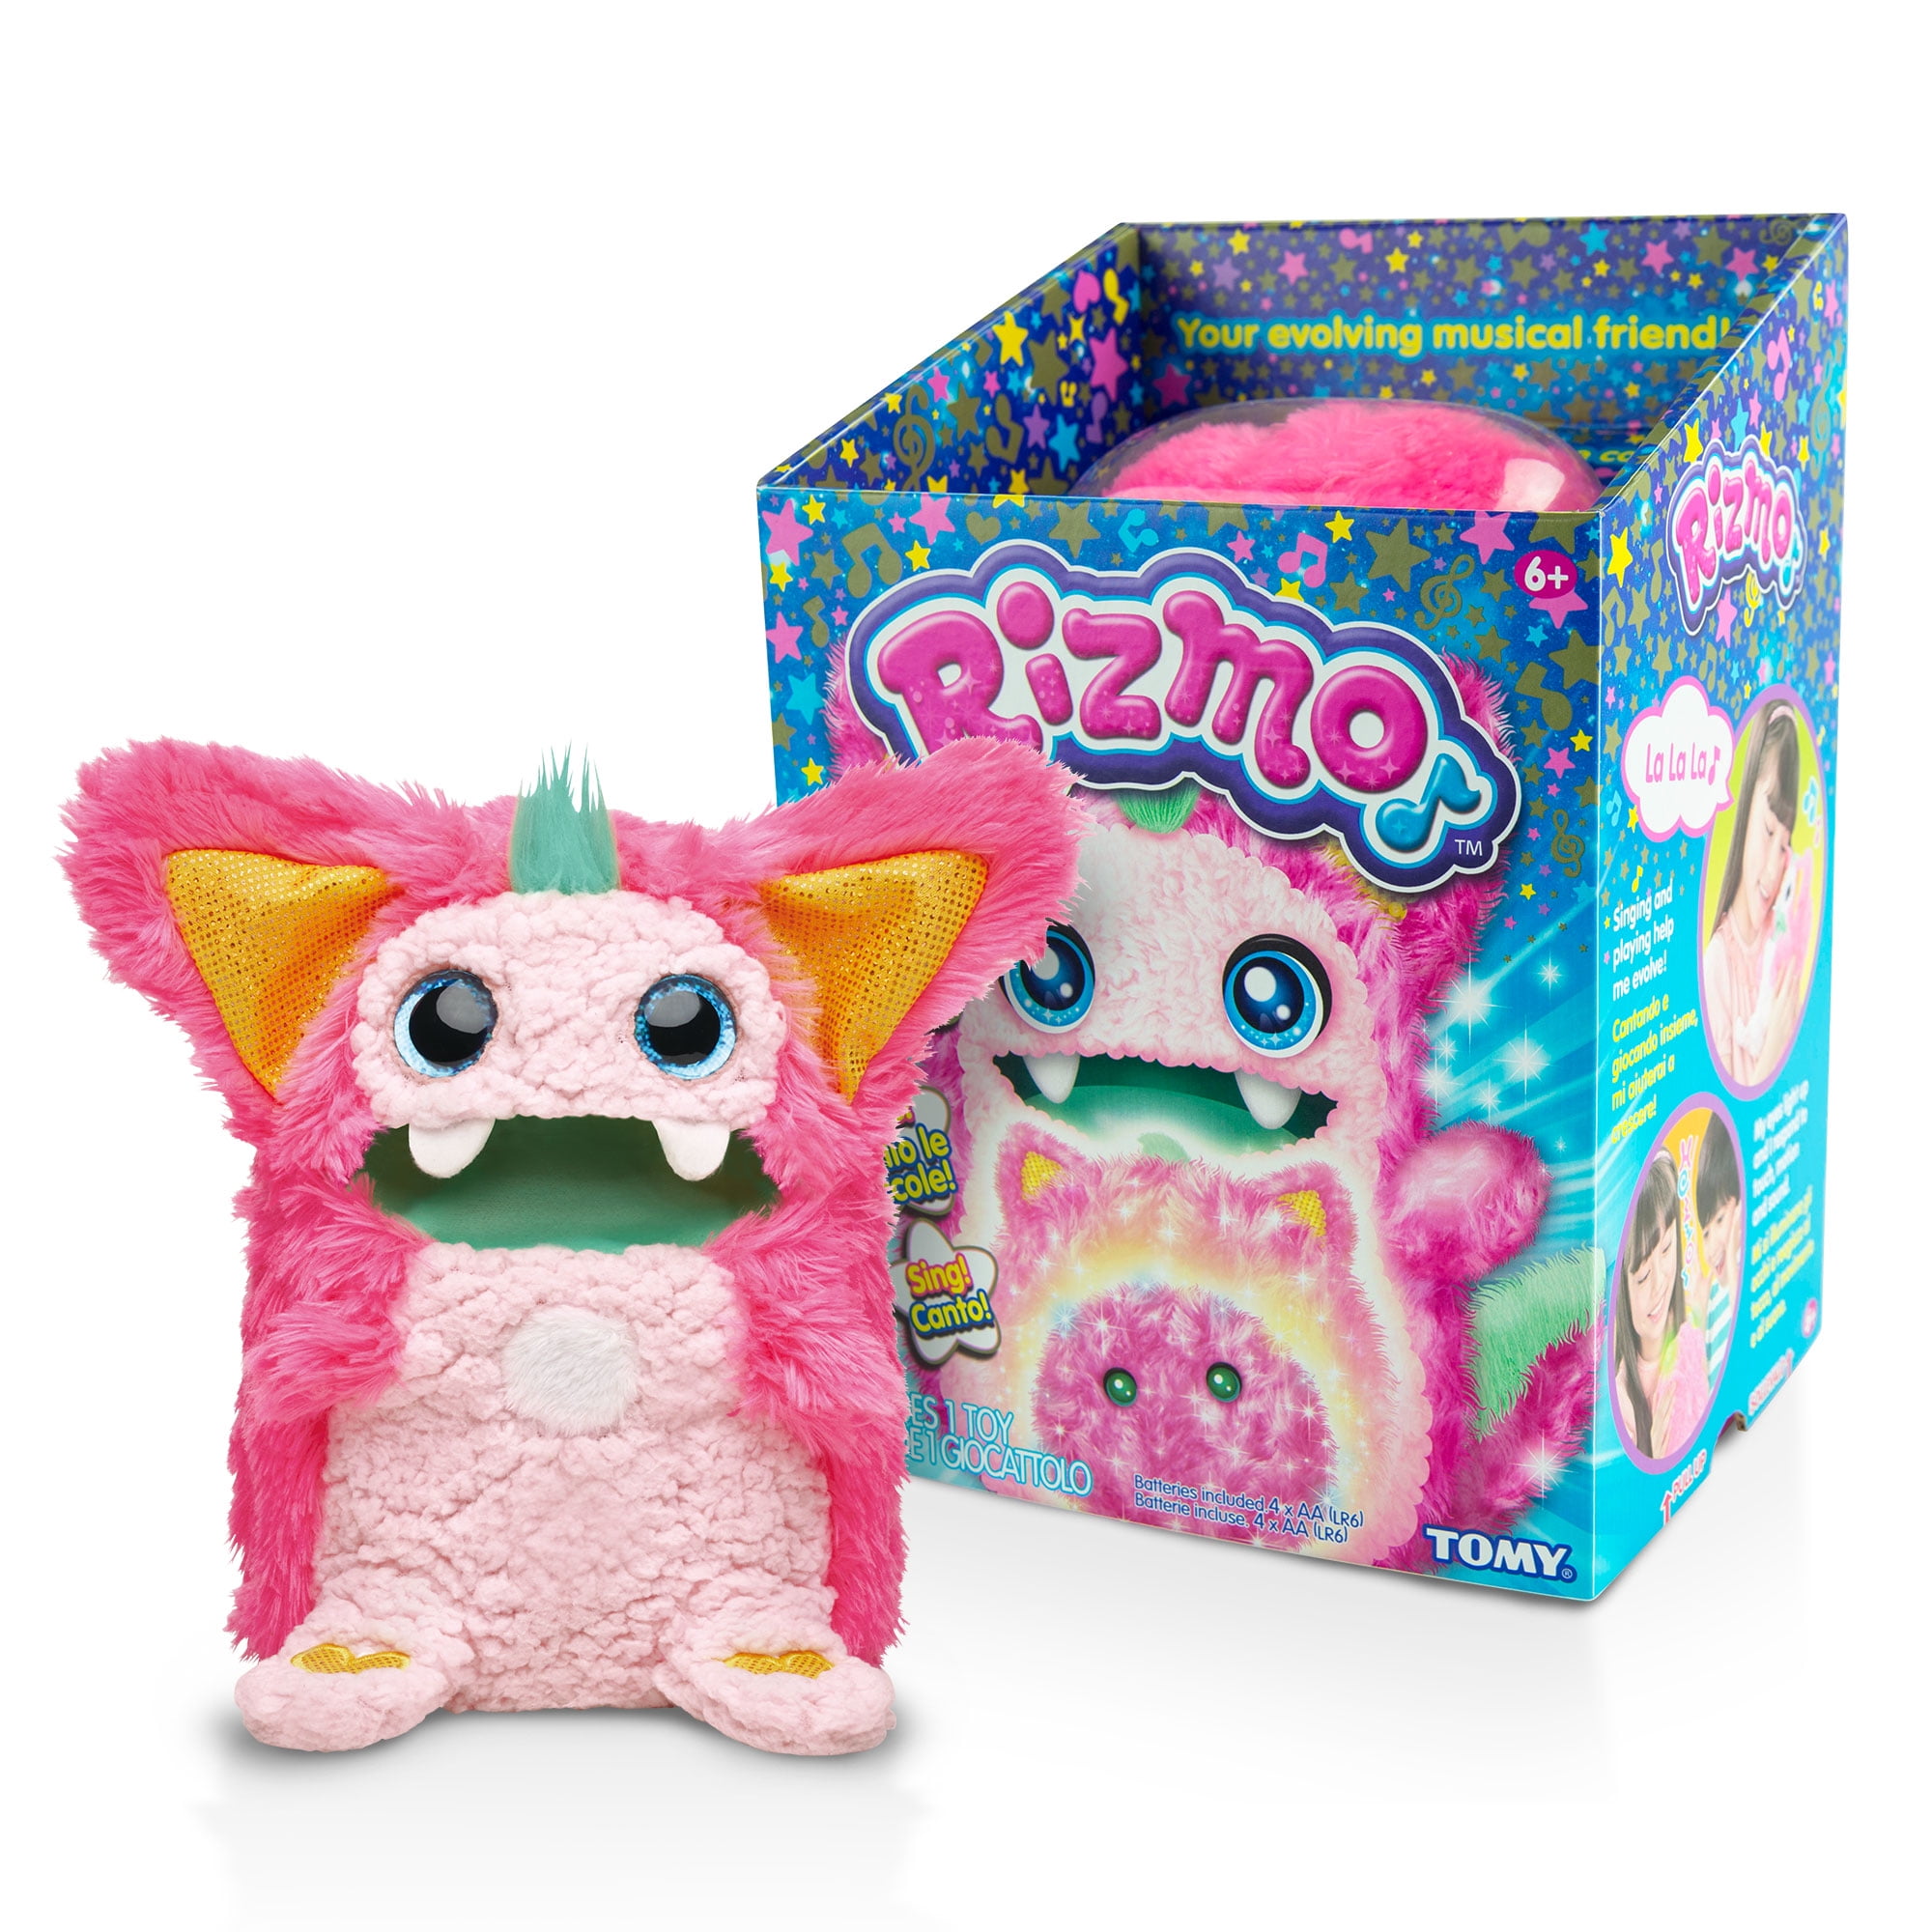 BERRY Pink Rizmo Interactive Evolving Musical Plush Toy 